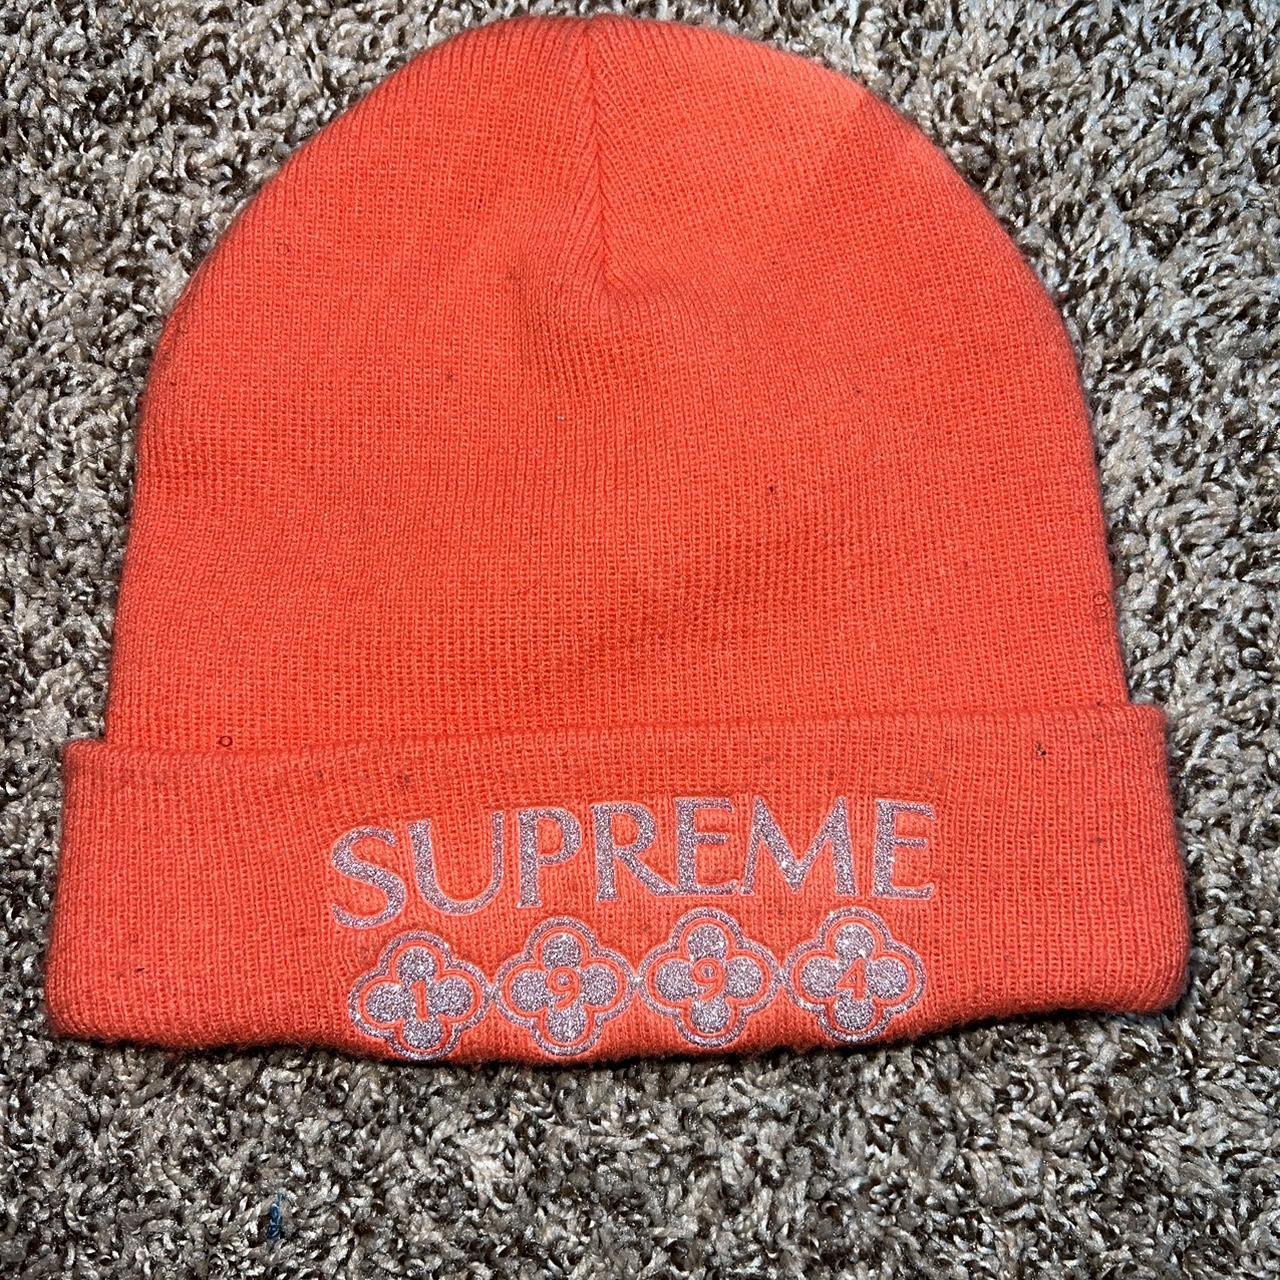 RED SUPREME USA BEANIE ✿no flaws ✿FREE TRACKED US - Depop